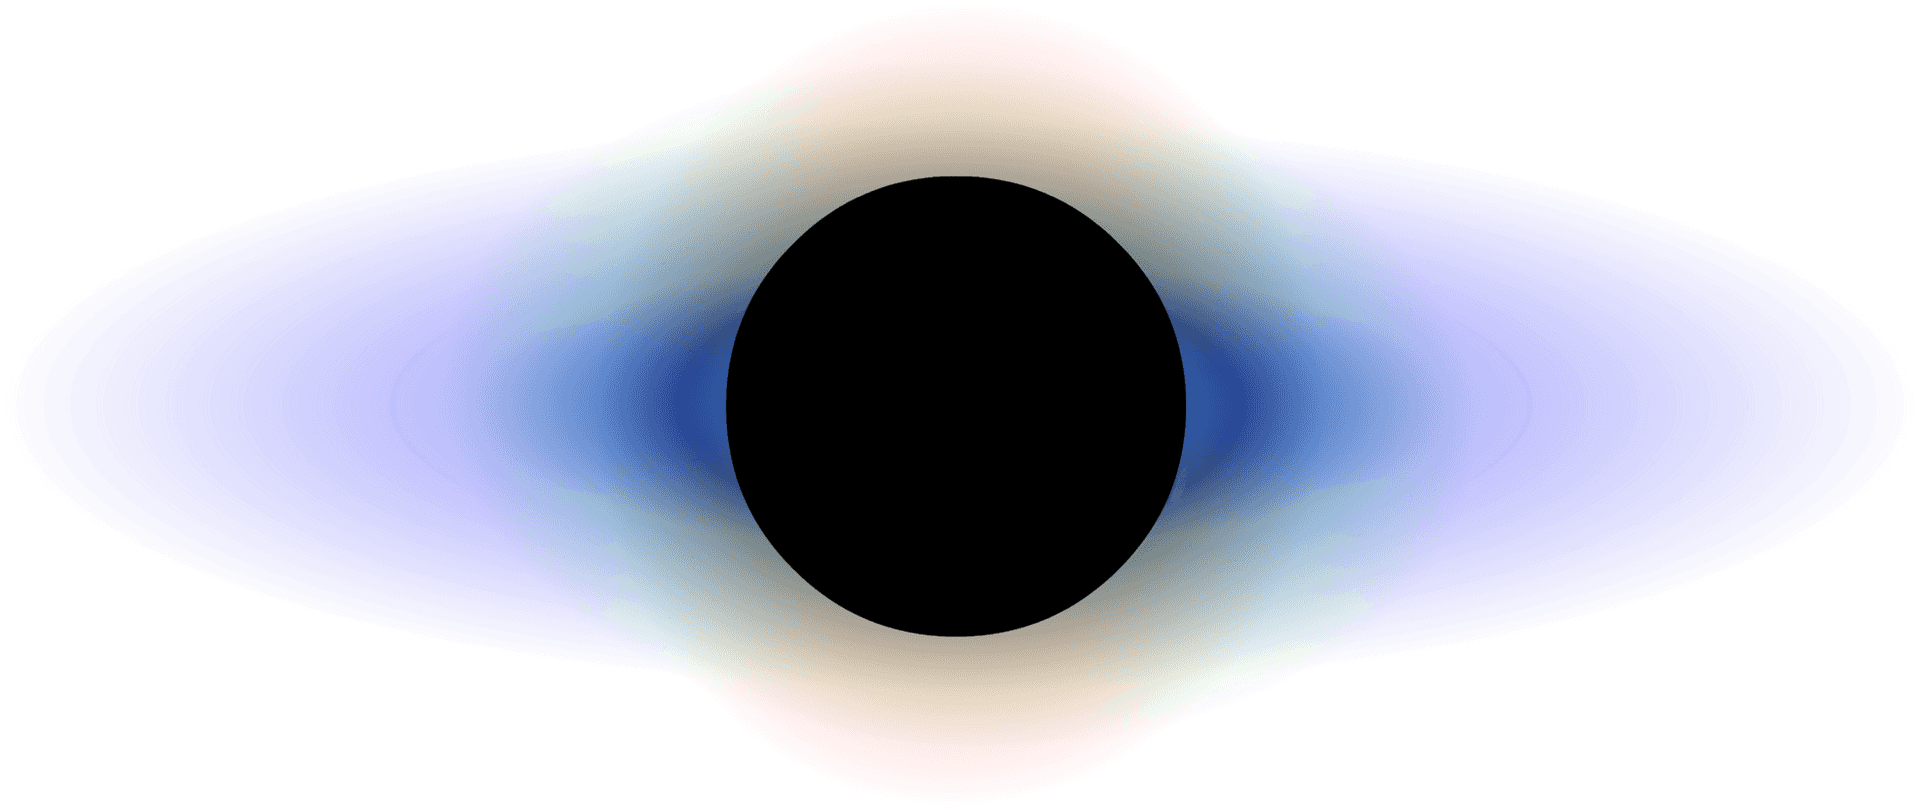 Abstract Black Hole Illustration PNG